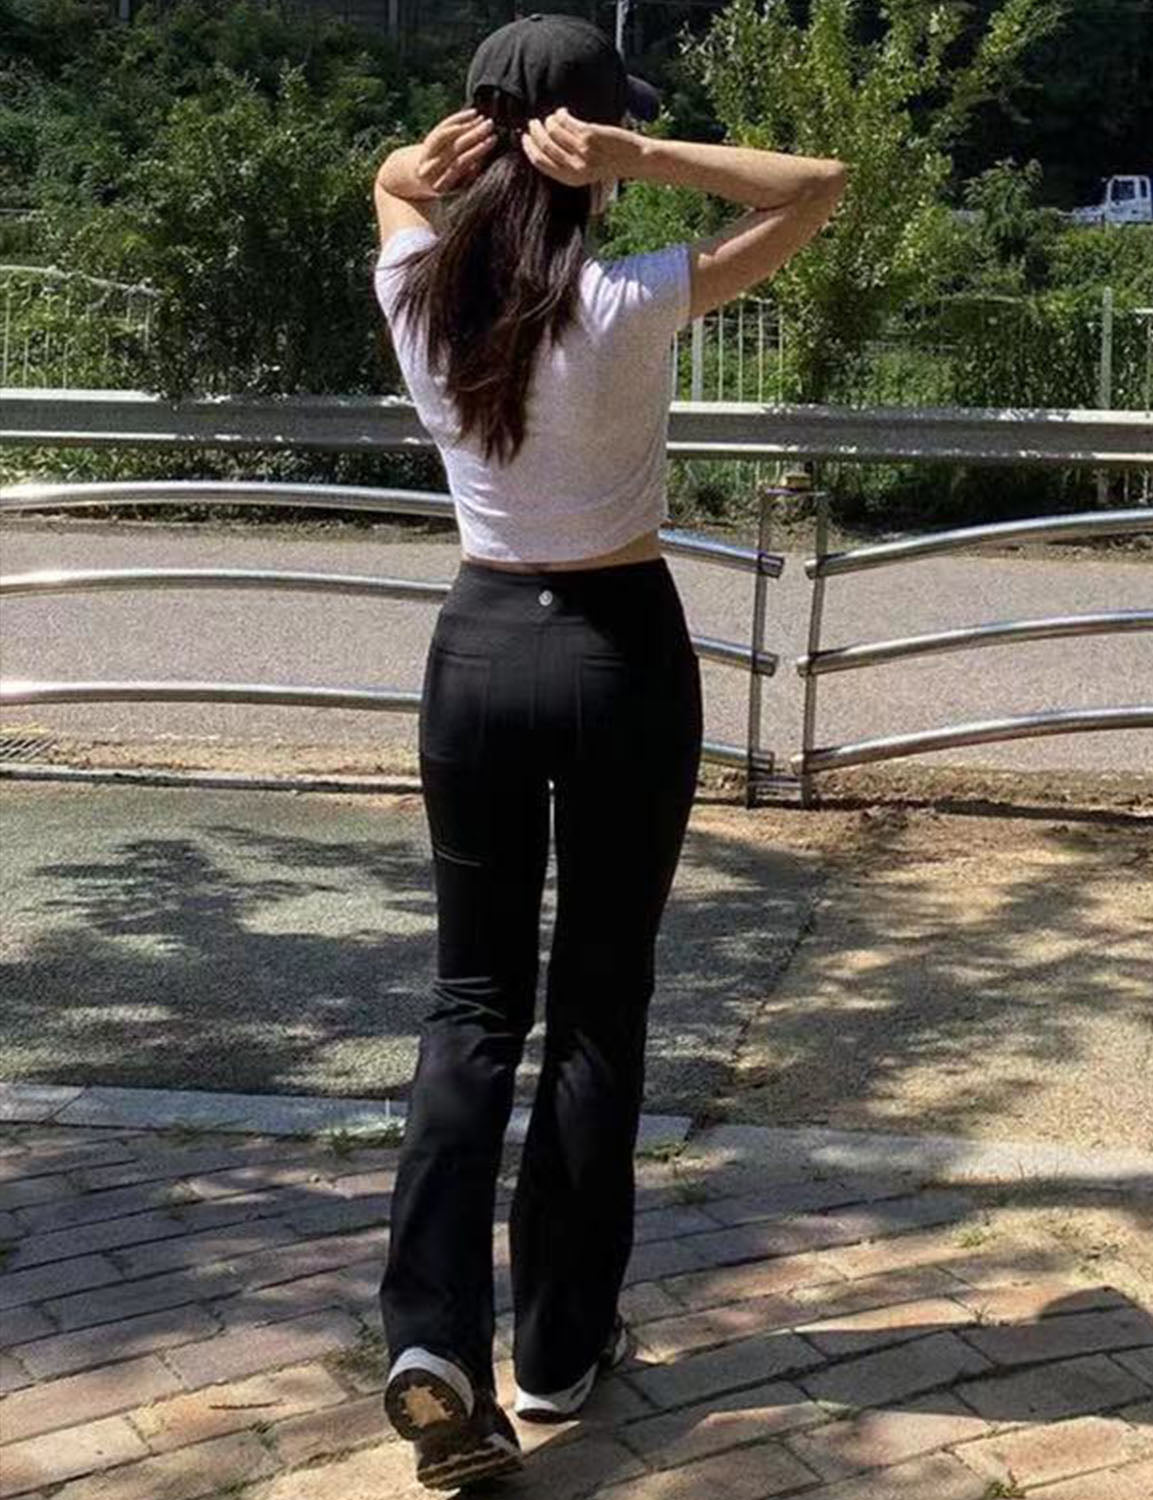 4 Pockets Bootcut Leggings black 75%Nylon/25%Spandex Fabric doesn't attract lint easily 4-way stretch No see-through Moisture-wicking Inner pocket Four lengths